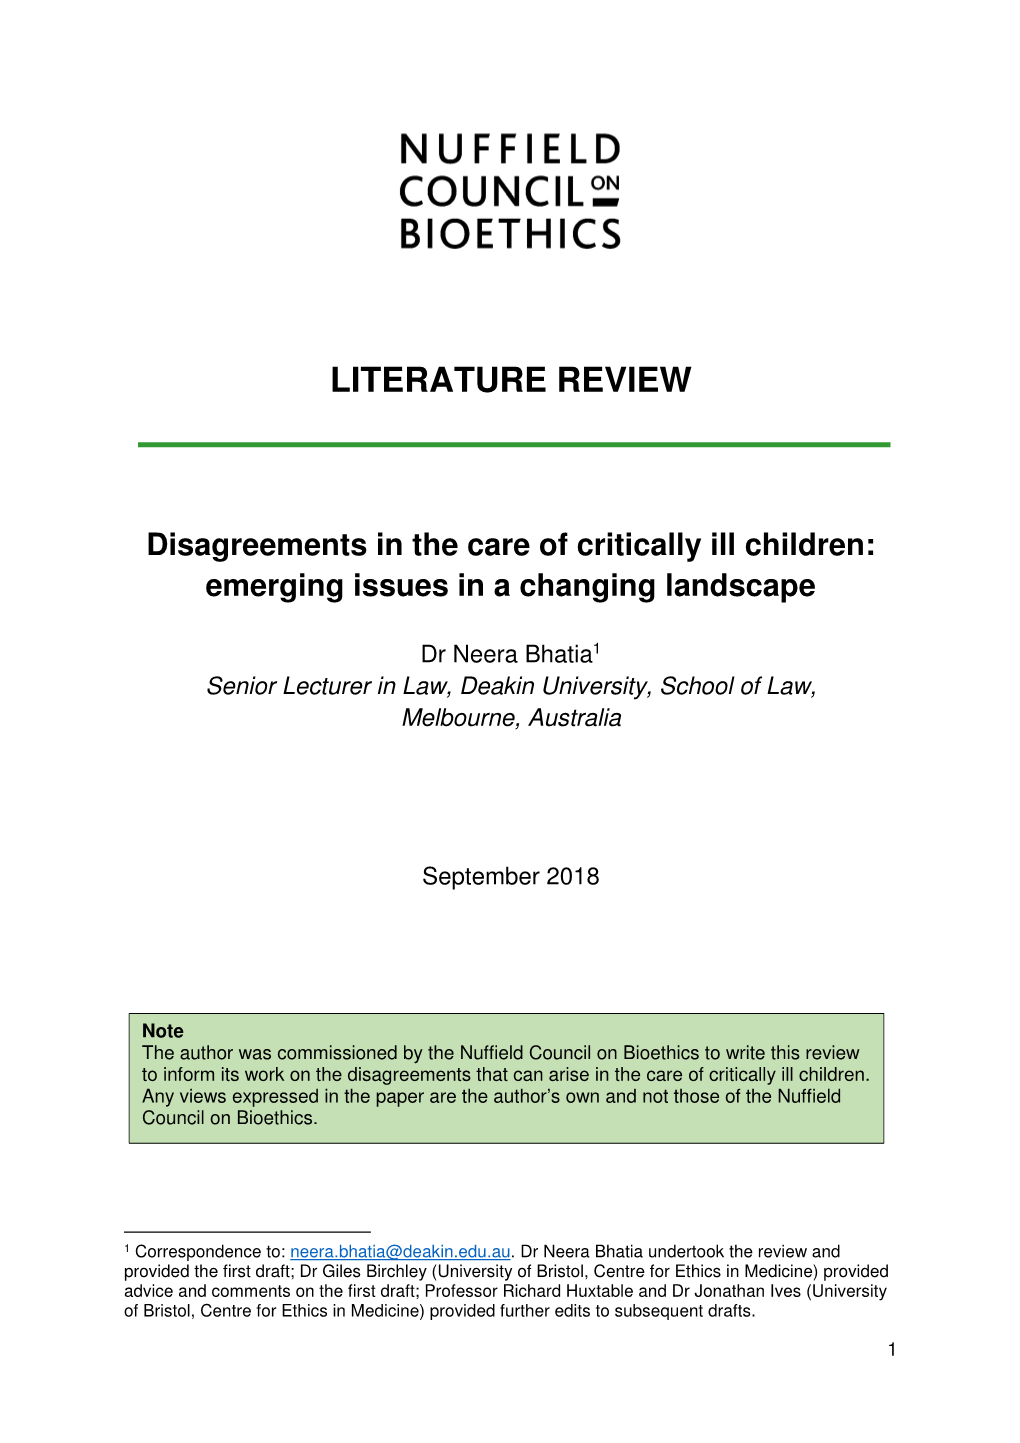 Disagreements in the Care of Critically Ill Children: Emerging Issues in a Changing Landscape